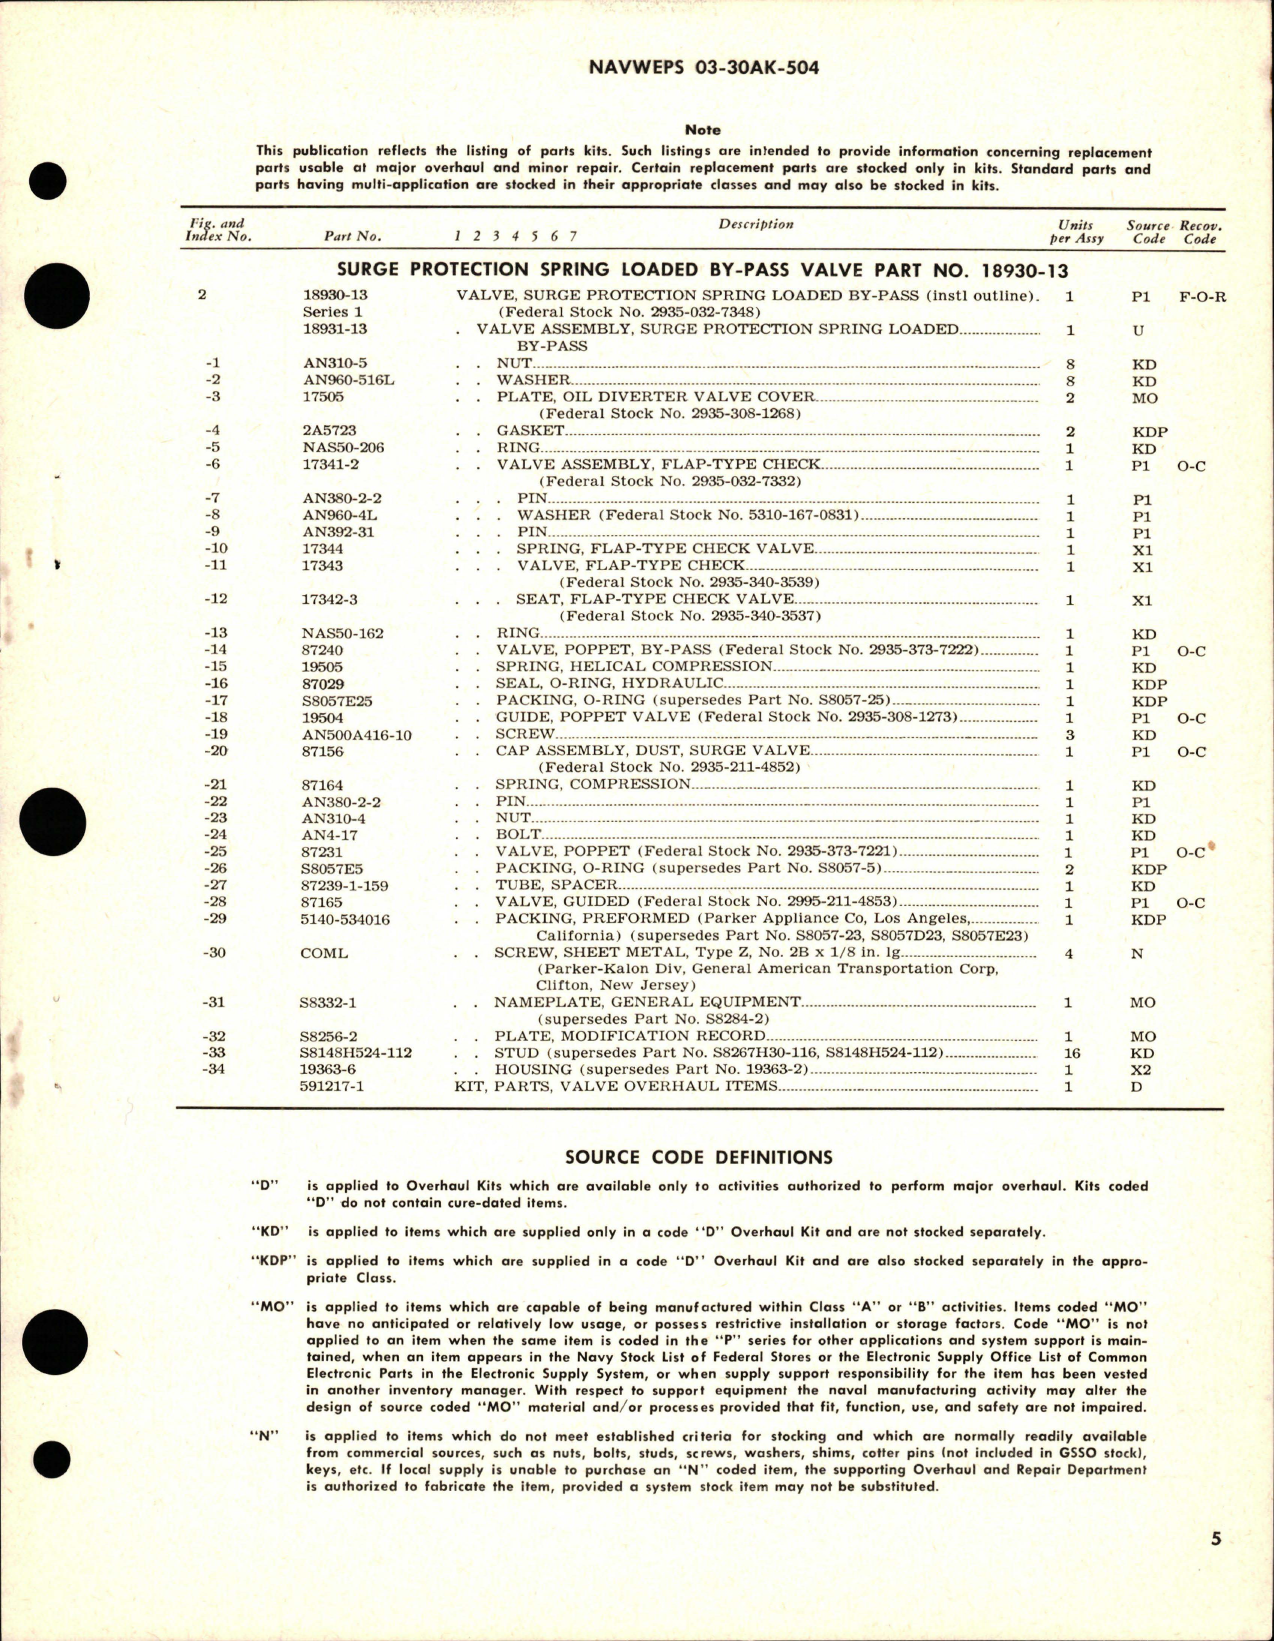 Sample page 5 from AirCorps Library document: Overhaul Instructions with Parts Breakdown for Surge Protection Spring Loaded By-Pass Valve - Part 18930-13